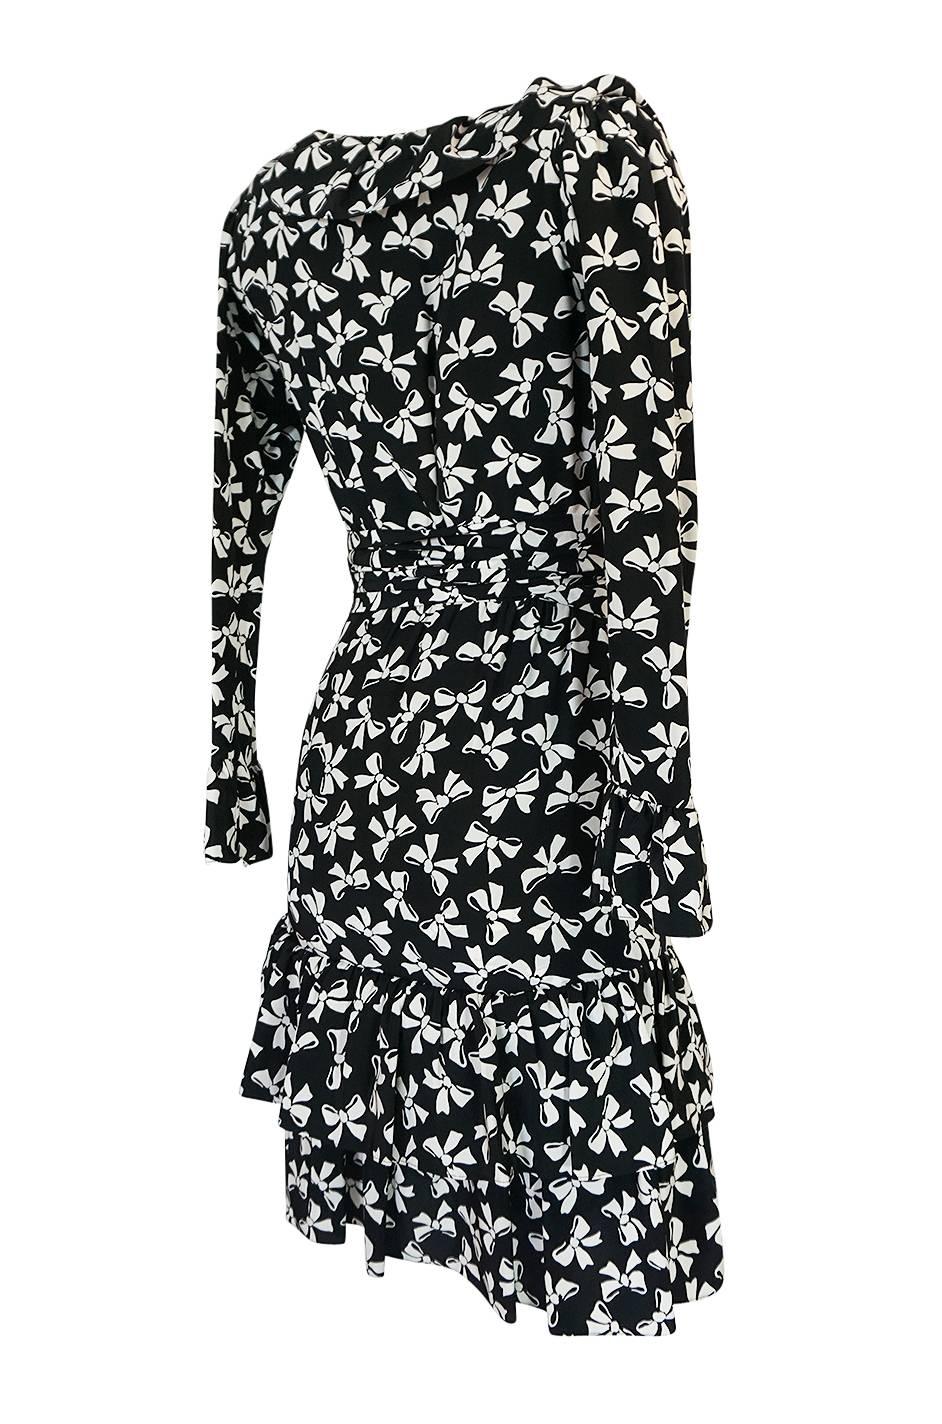 That wonderful bow print on this piece was featured in an editorial for Vogue in 1987 and worn by Linda Evangelista. This dress is from that same collection with the added bonus of having that adorable print cover the entire surface. The dress is